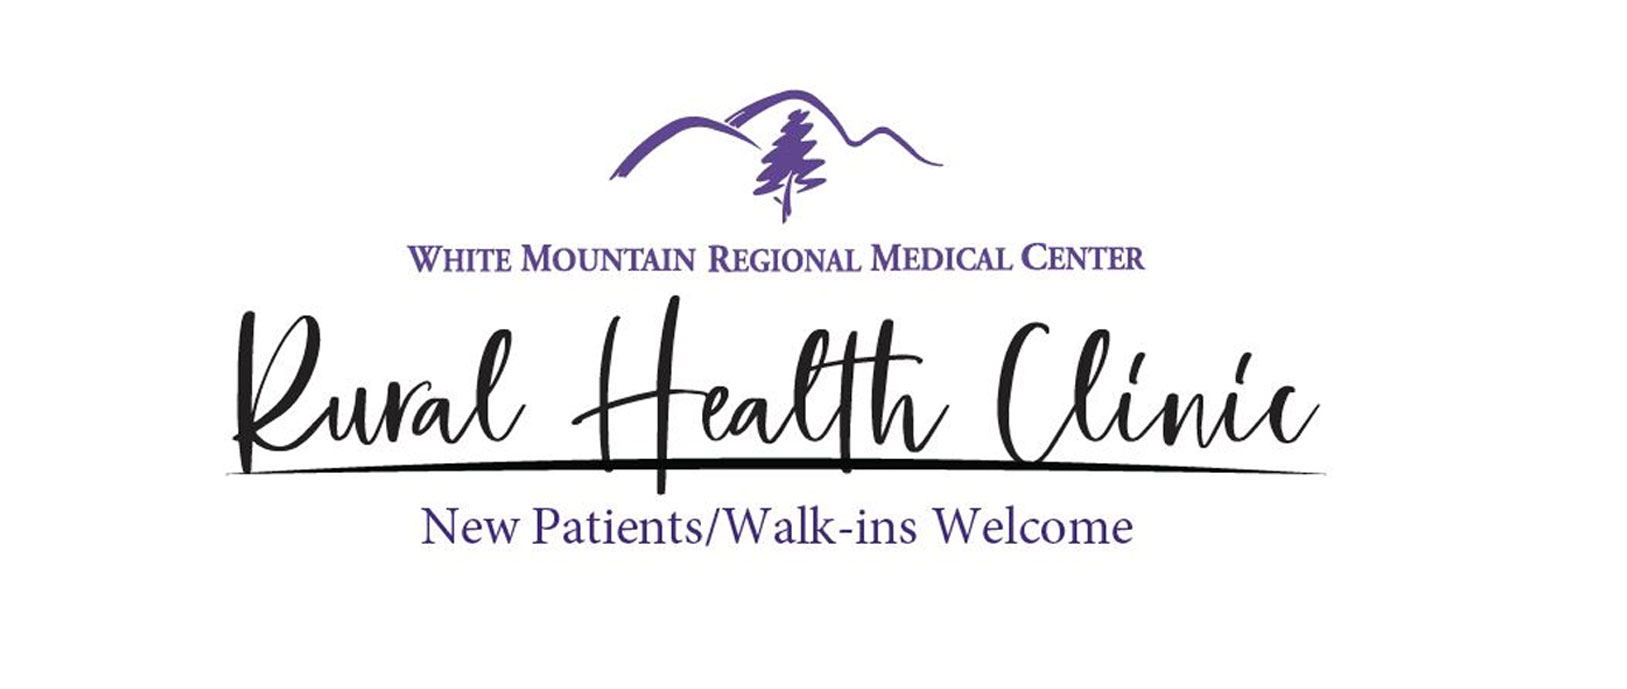 Banner of White Mountain Regional Medical Center logo (mountains and a tree). Banner says:

WHITE MOUNTAIN REGIONAL MEDICAL CENTER
RURAL HEALTH CLINIC
New Patients/ Walk-Ins Welcome